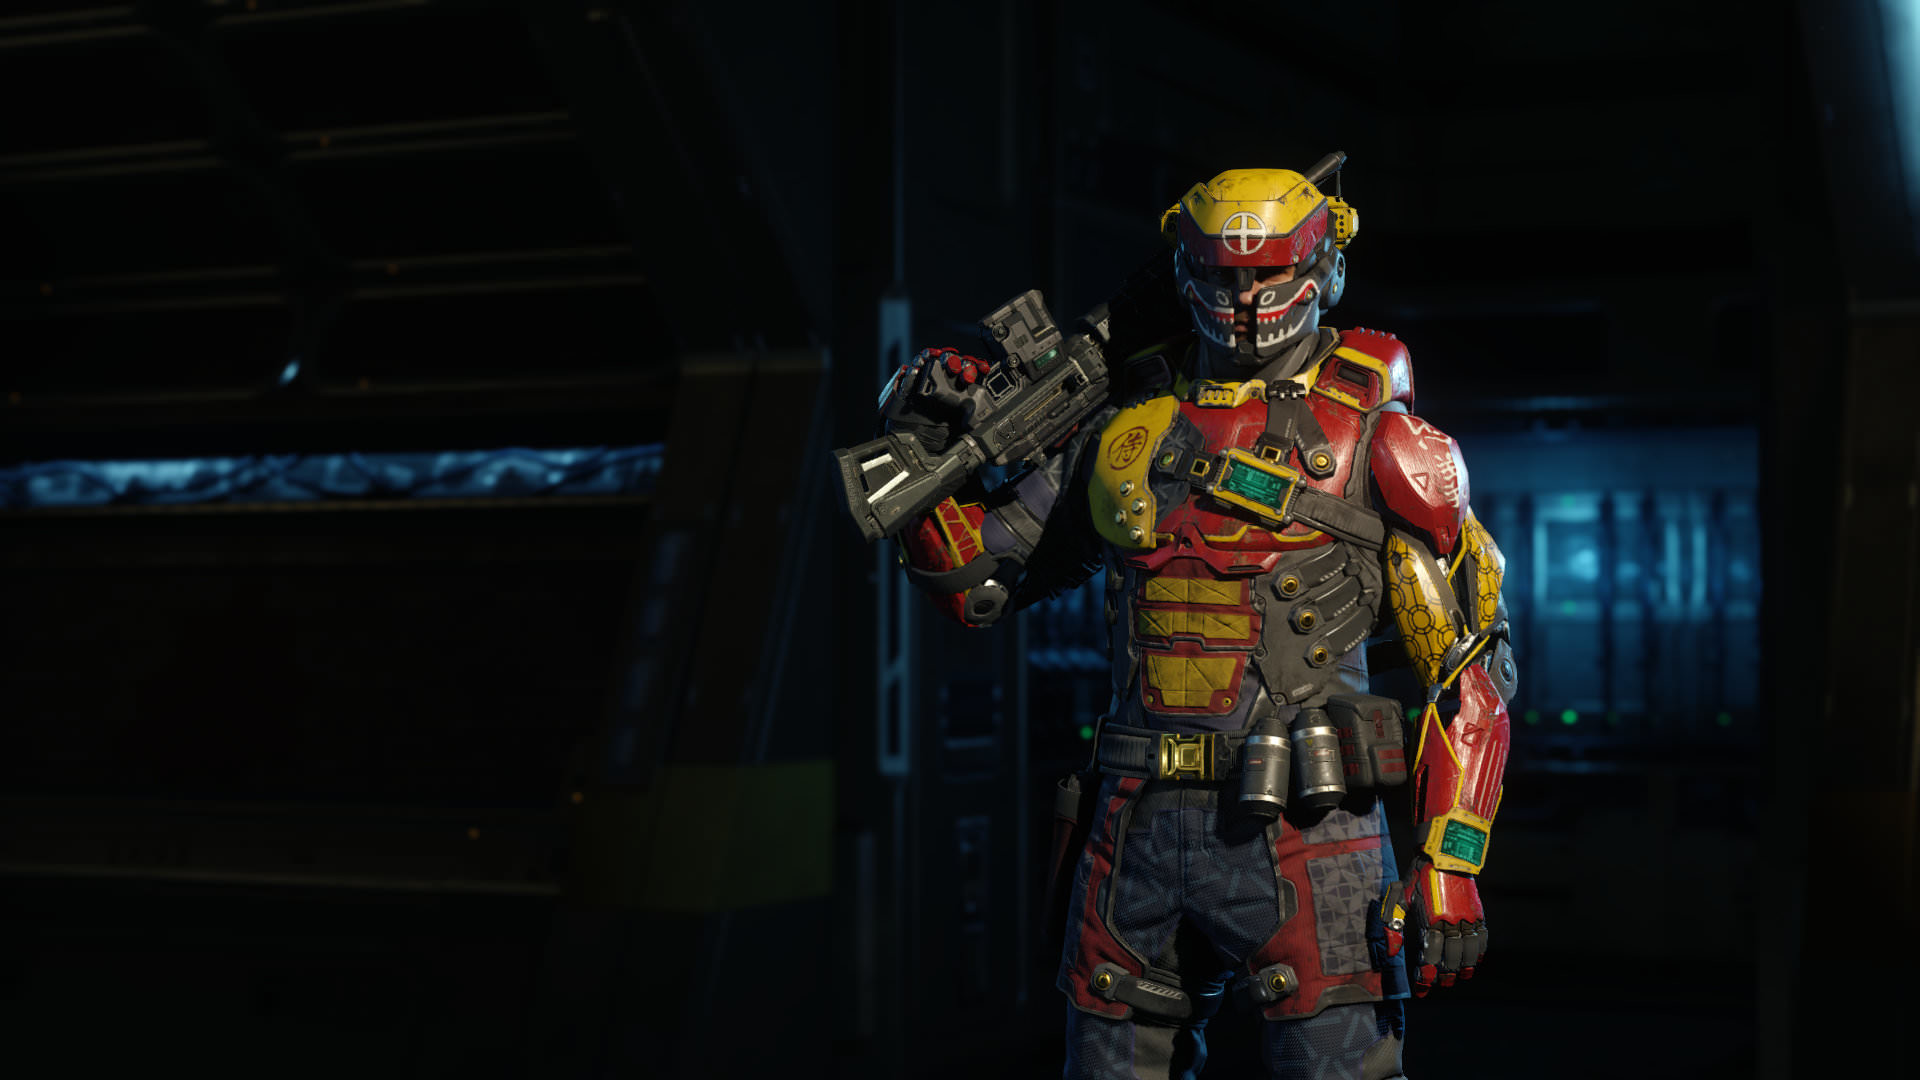 New Weapons, Camos, Gear Sets, and more available now in Black Ops 3s Black Market Charlie INTEL